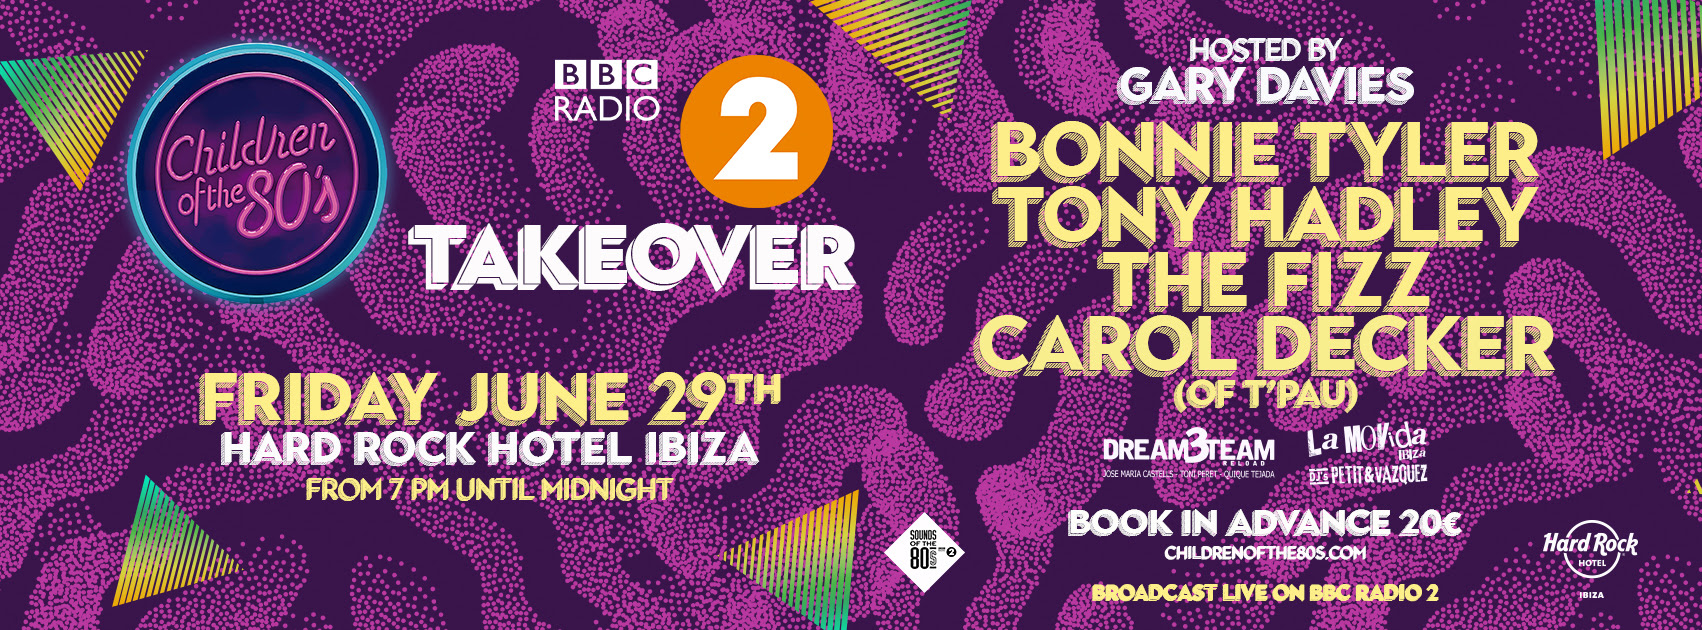 BBC Radio 2 to broadcast 'Children of the 80's' live from Hard Rock Hotel Ibiza